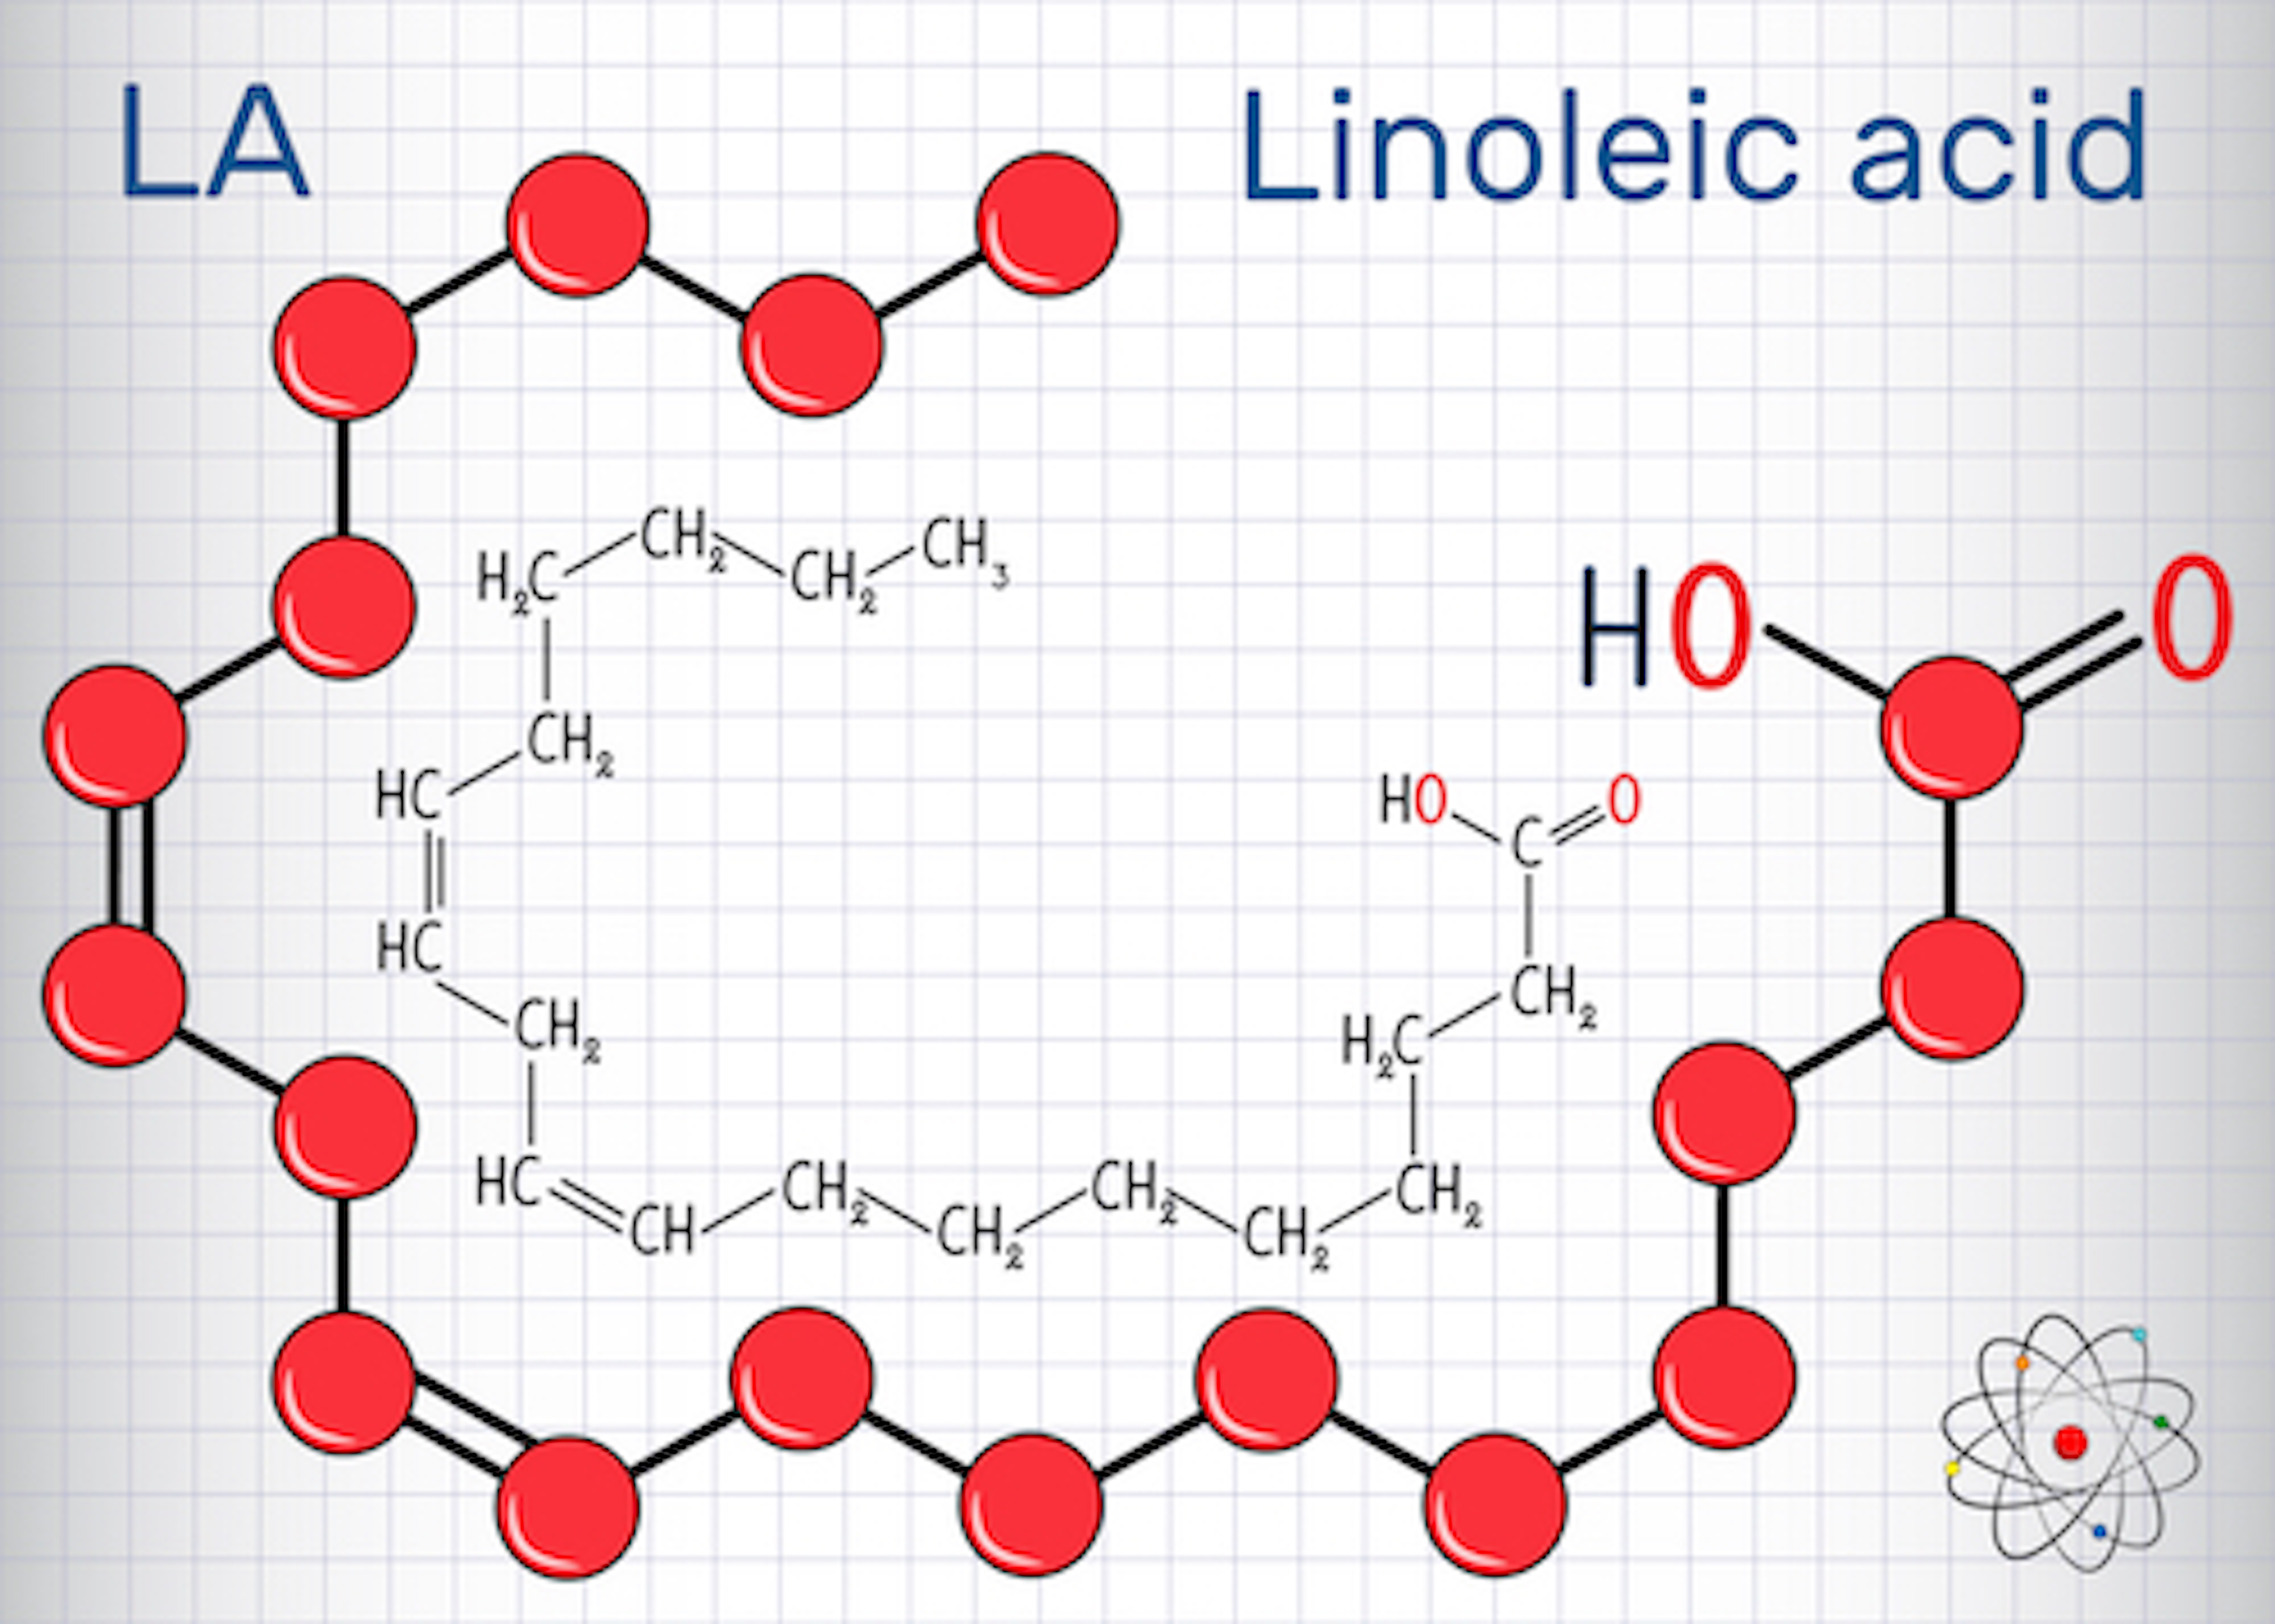 Linoleic fatty acid is a polyunsaturated fatty acid or PUFA and is produced by the skin and is necessary for a healthy skin barrier.